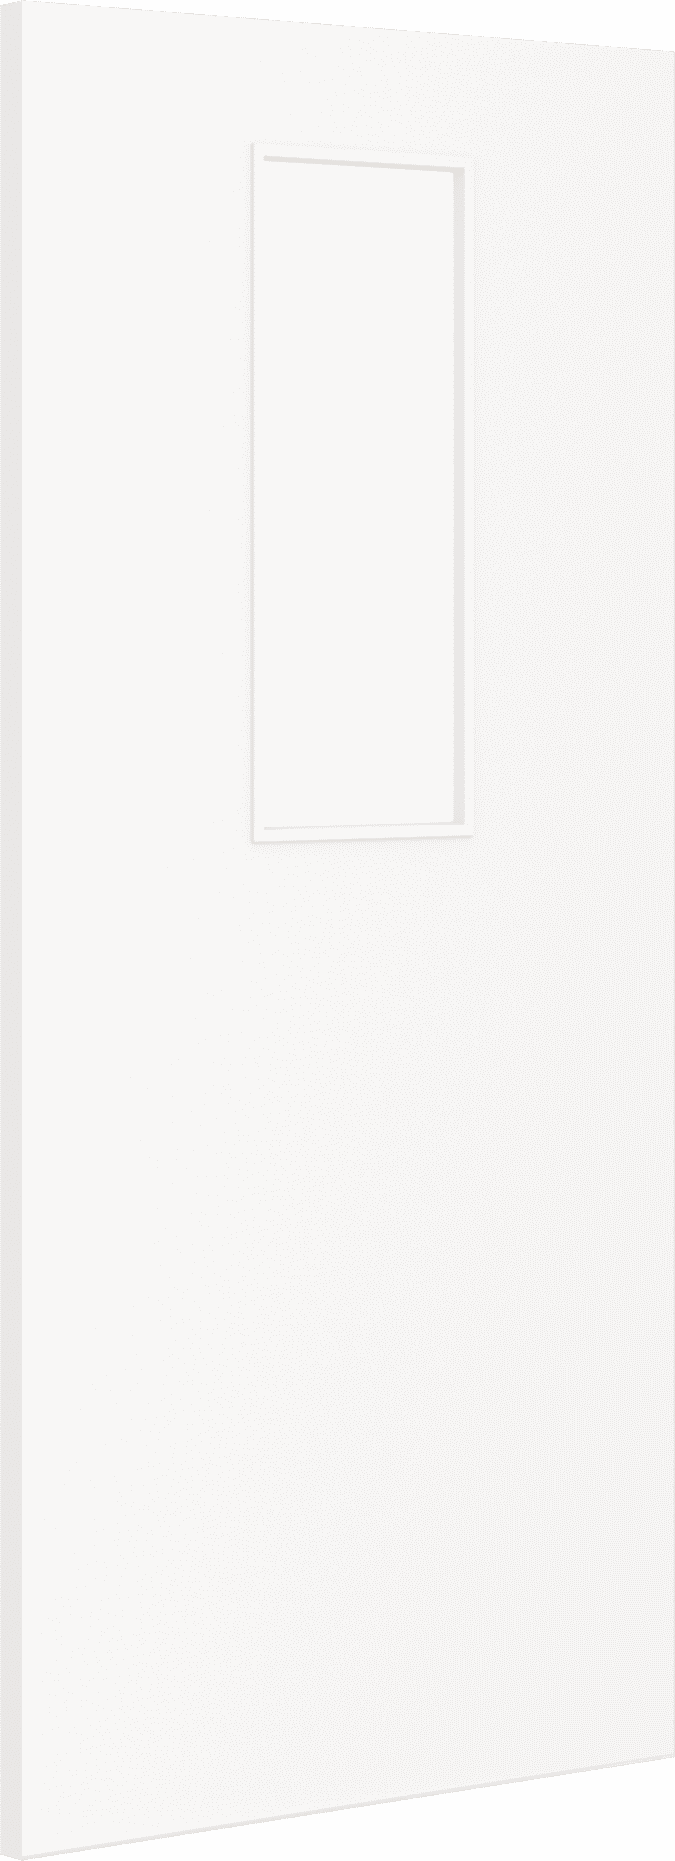 1981mm x 610mm x 44mm (24") Architectural Paint Grade White 14 Frosted Glazed Fire Door Blank